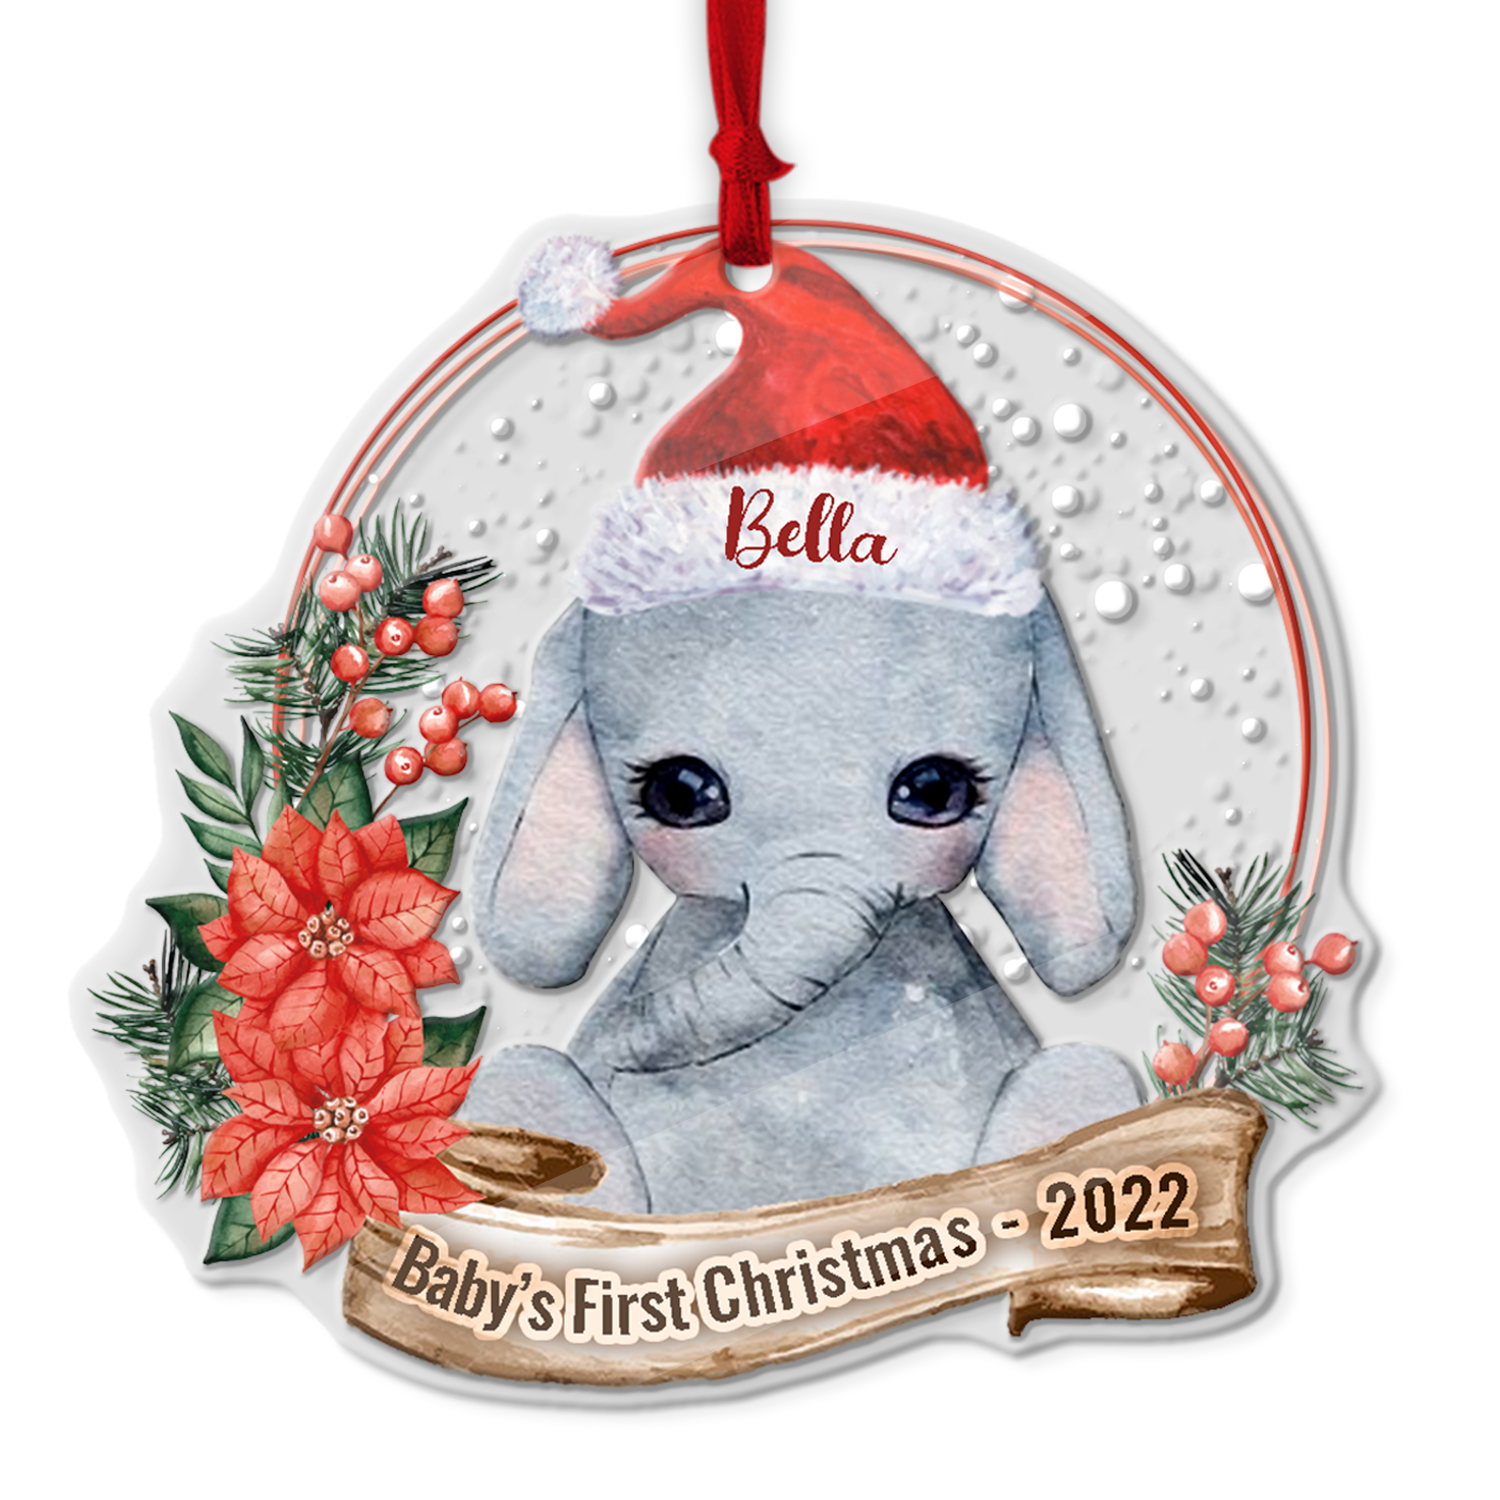 Personalized Name And Text, Ornament For Baby, Baby's First Christmas, Christmas Elephant, Christmas Shape Ornament 2 Sides